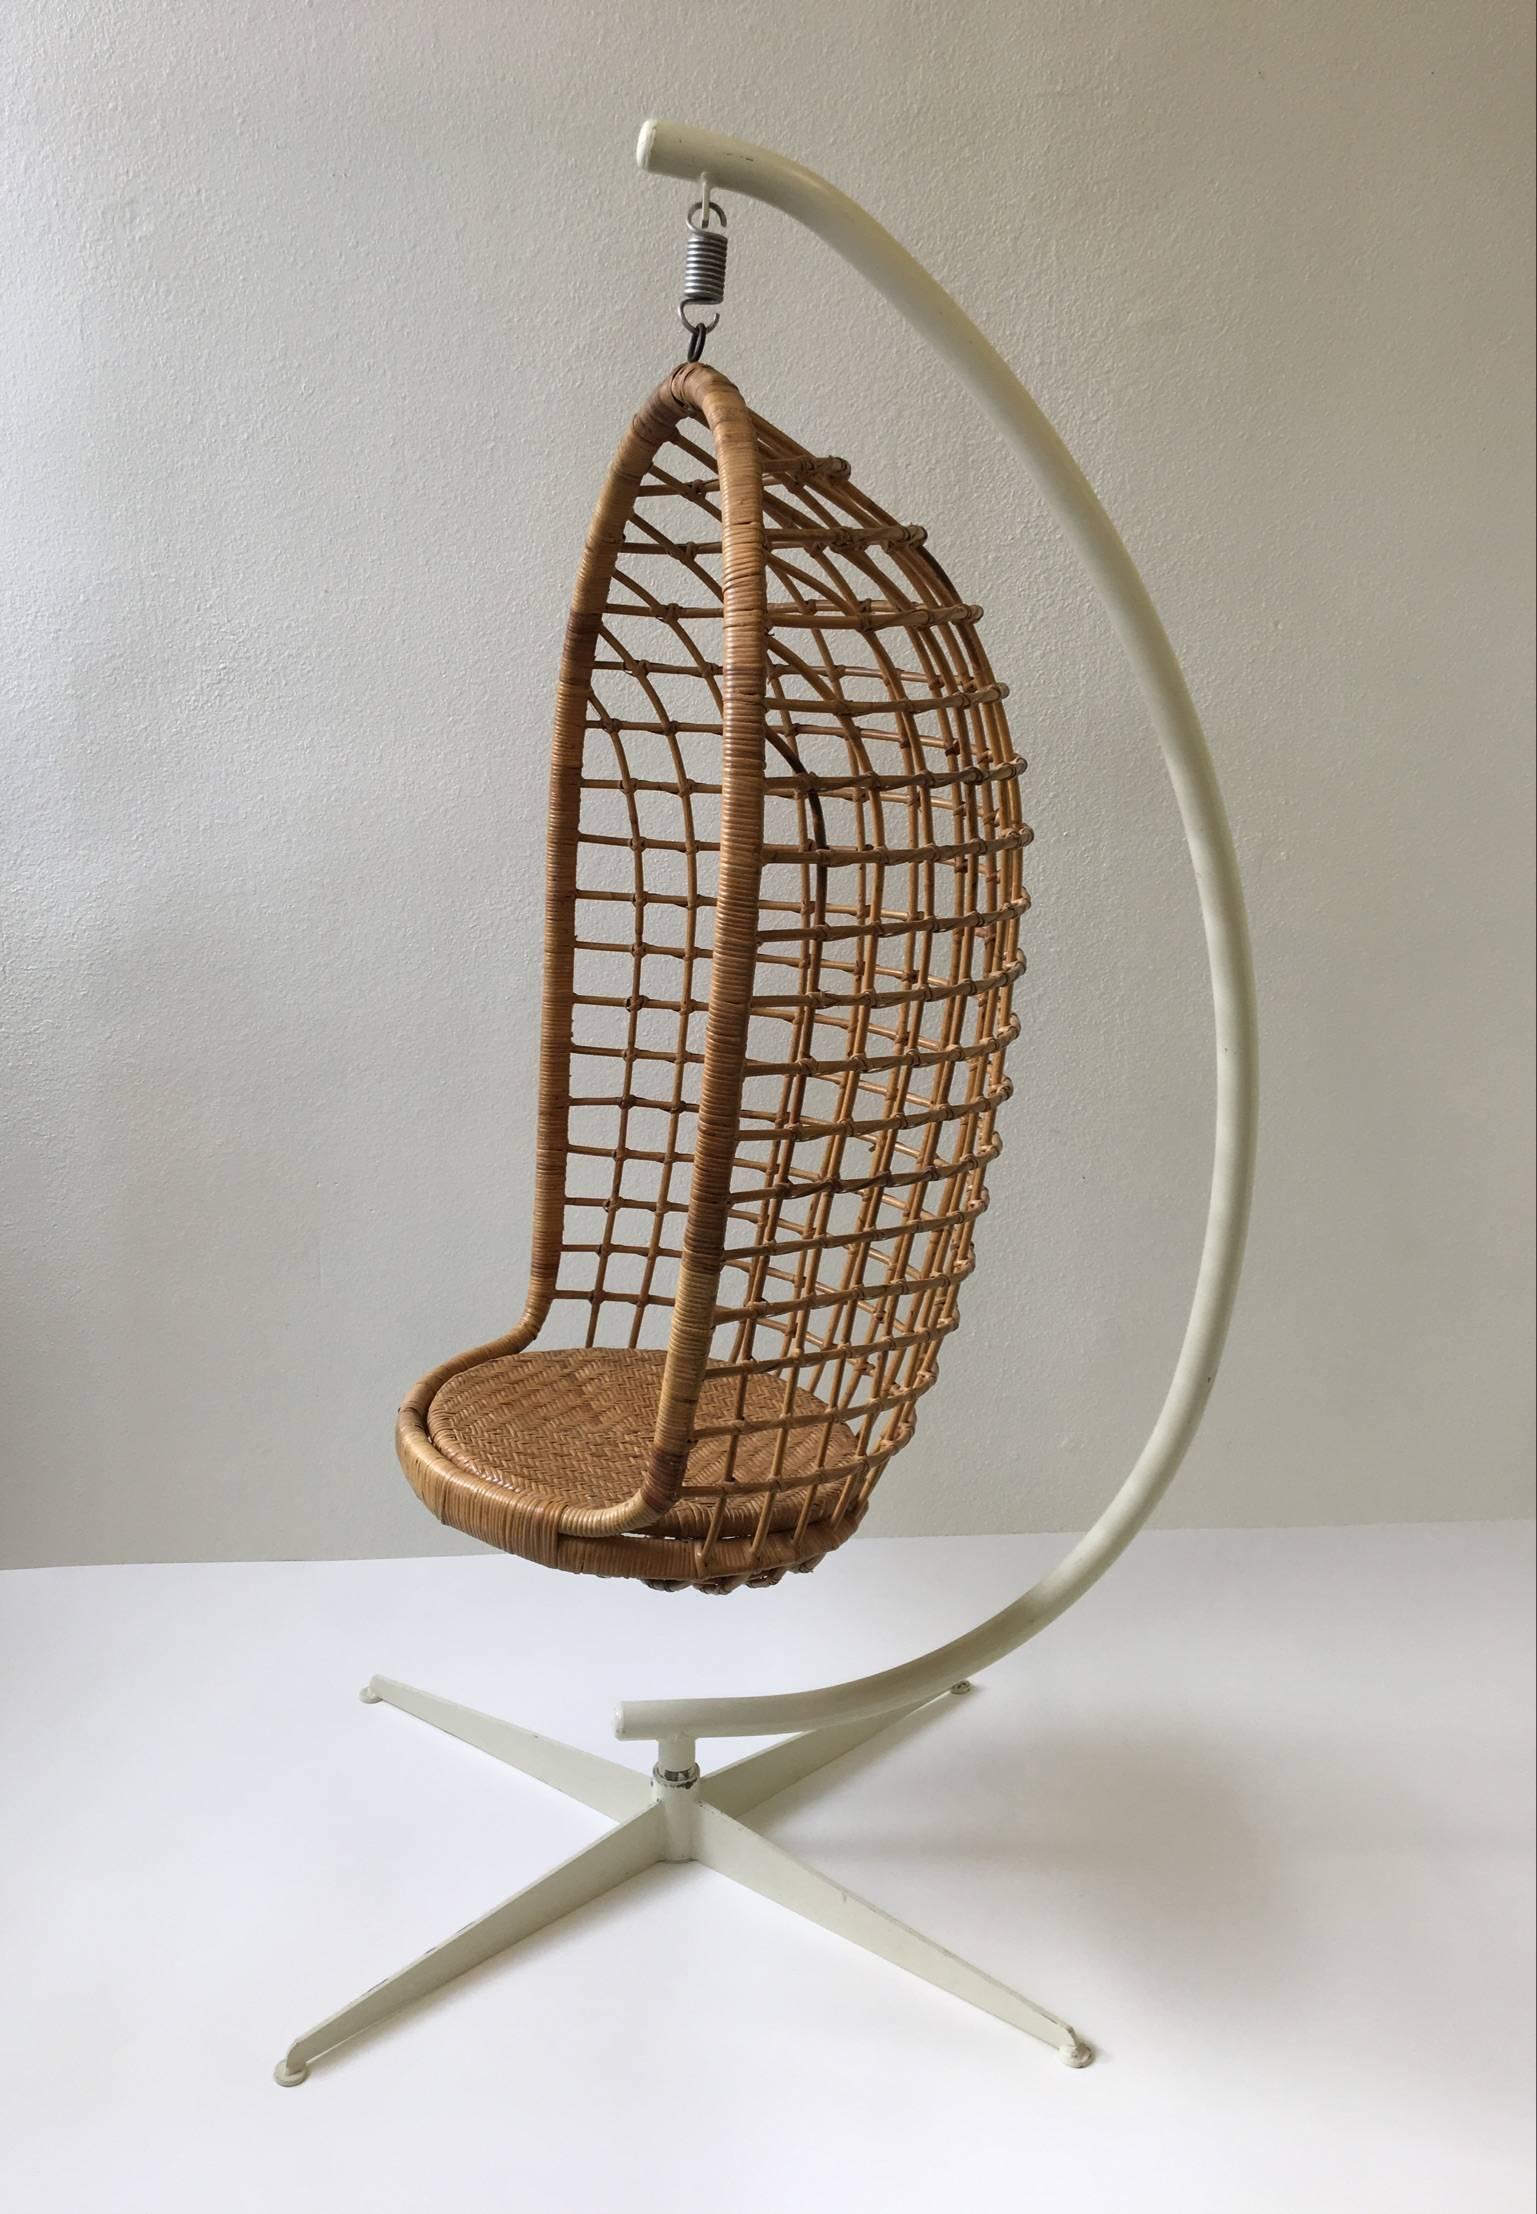 A beautiful original 1970s rattan and iron hanging chair. The chair is in original condition. The iron is painted in a cream color paint and it has some wear.